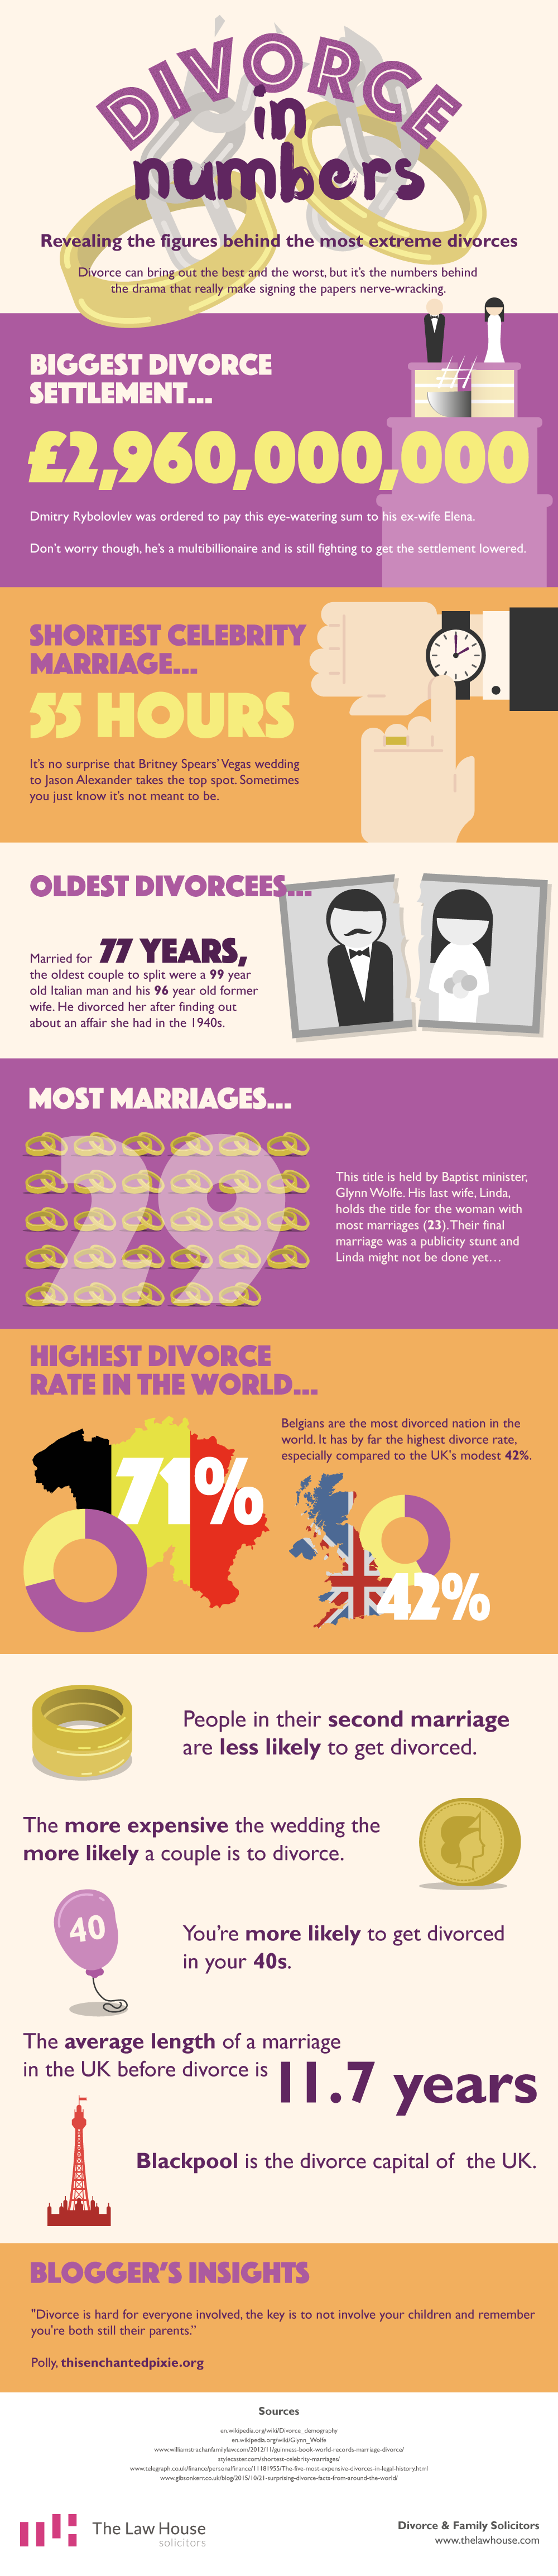 Divorce-in-numbers-[Polly-thisenchantedpixie]